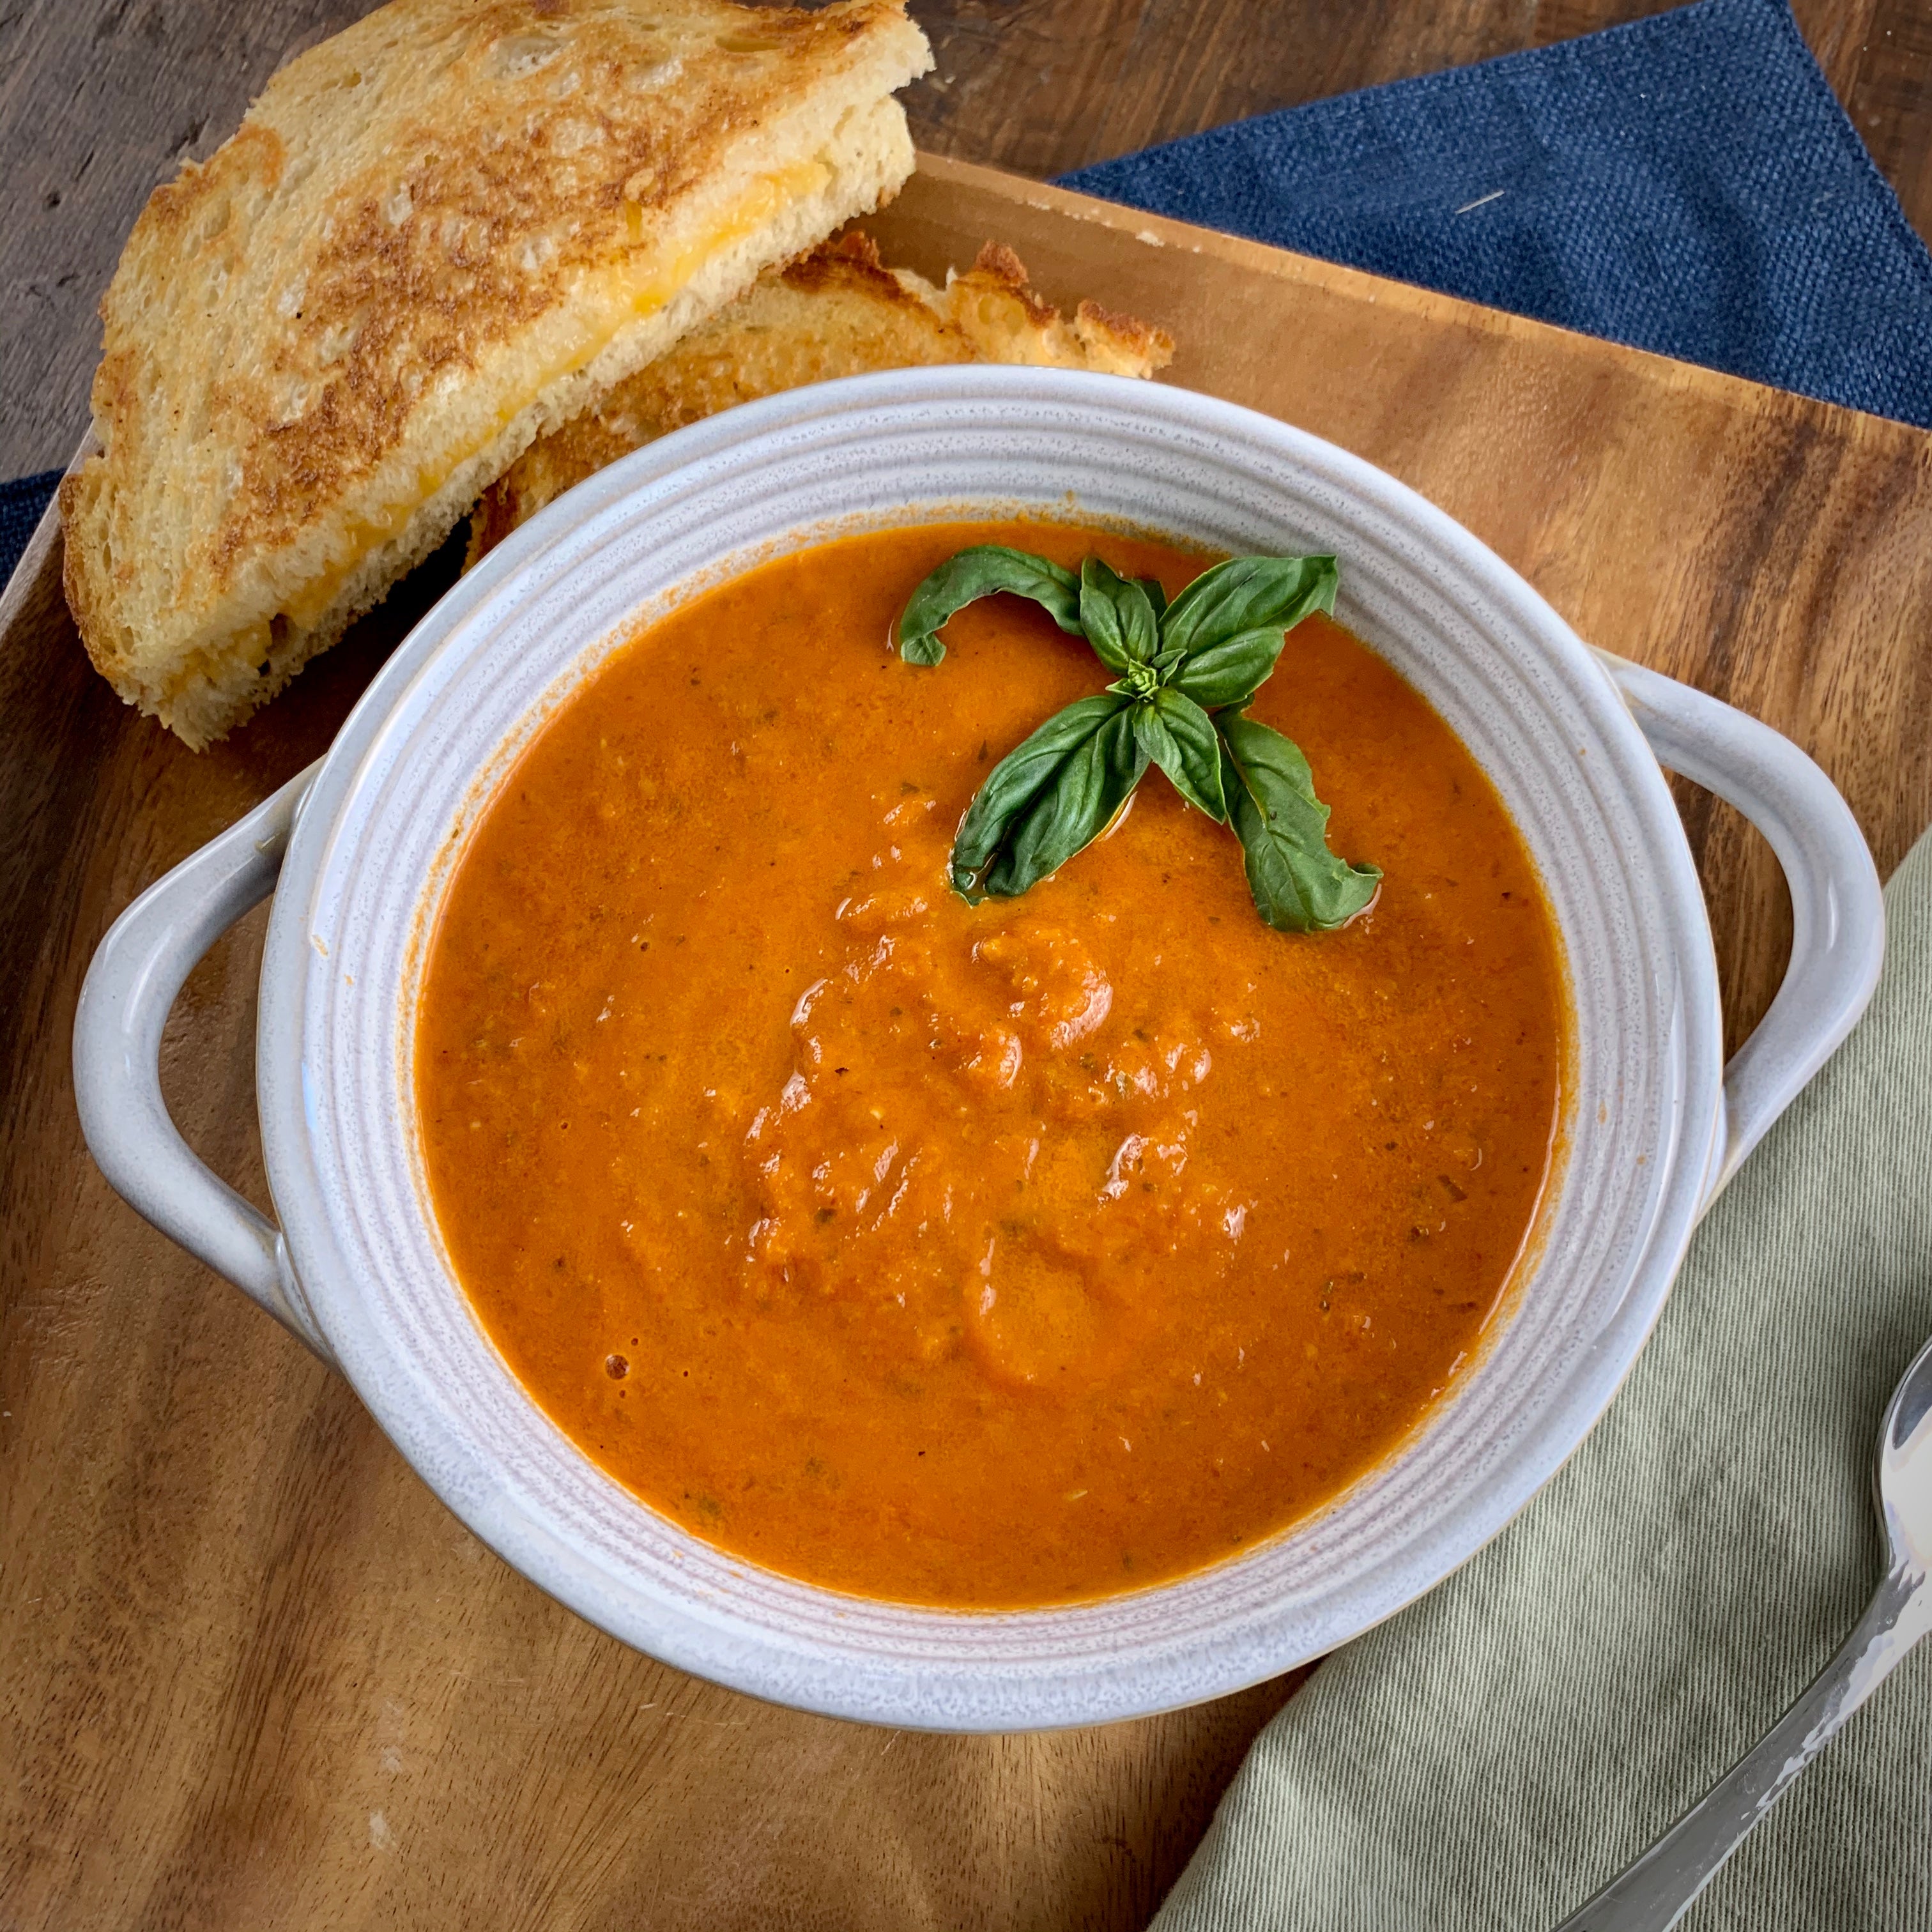 Homemade Tomato Soup with Fresh Tomatoes